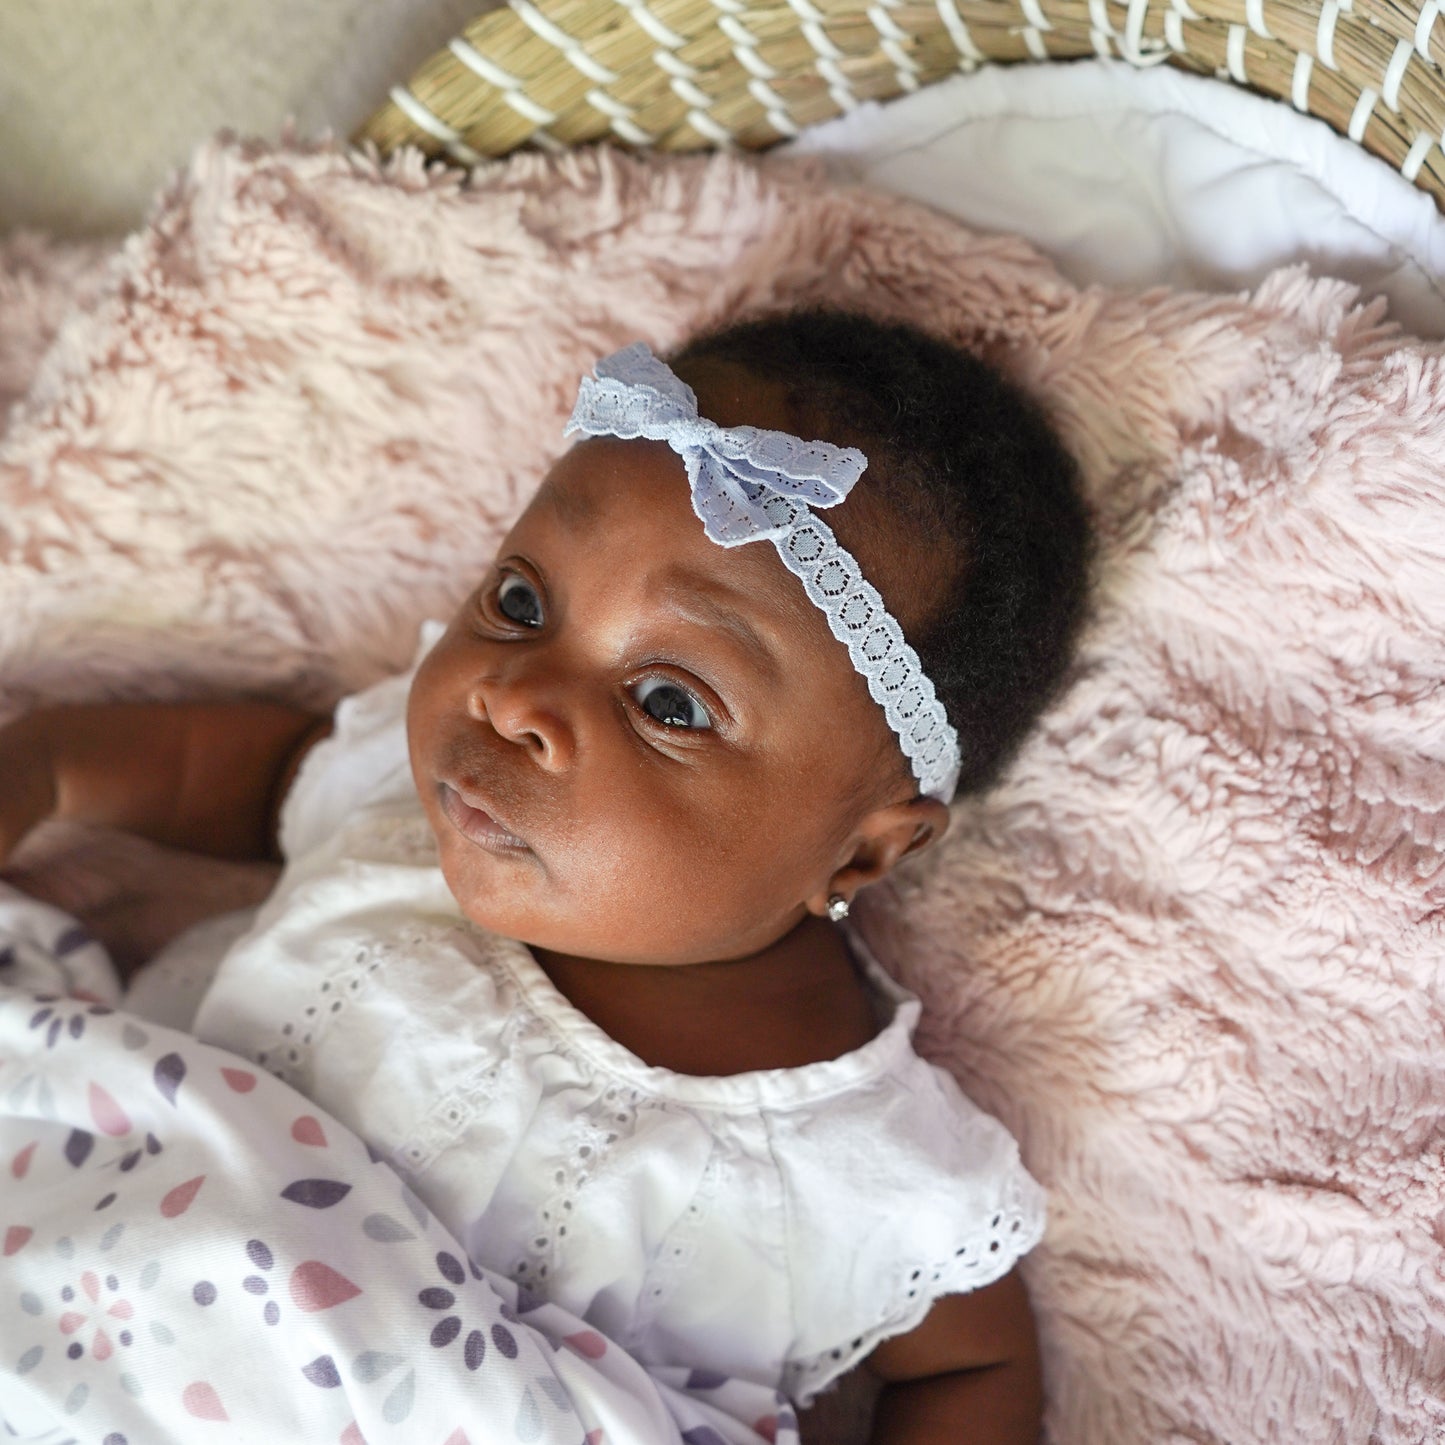 Stretch Lace Bow Headband for Babies: Skye